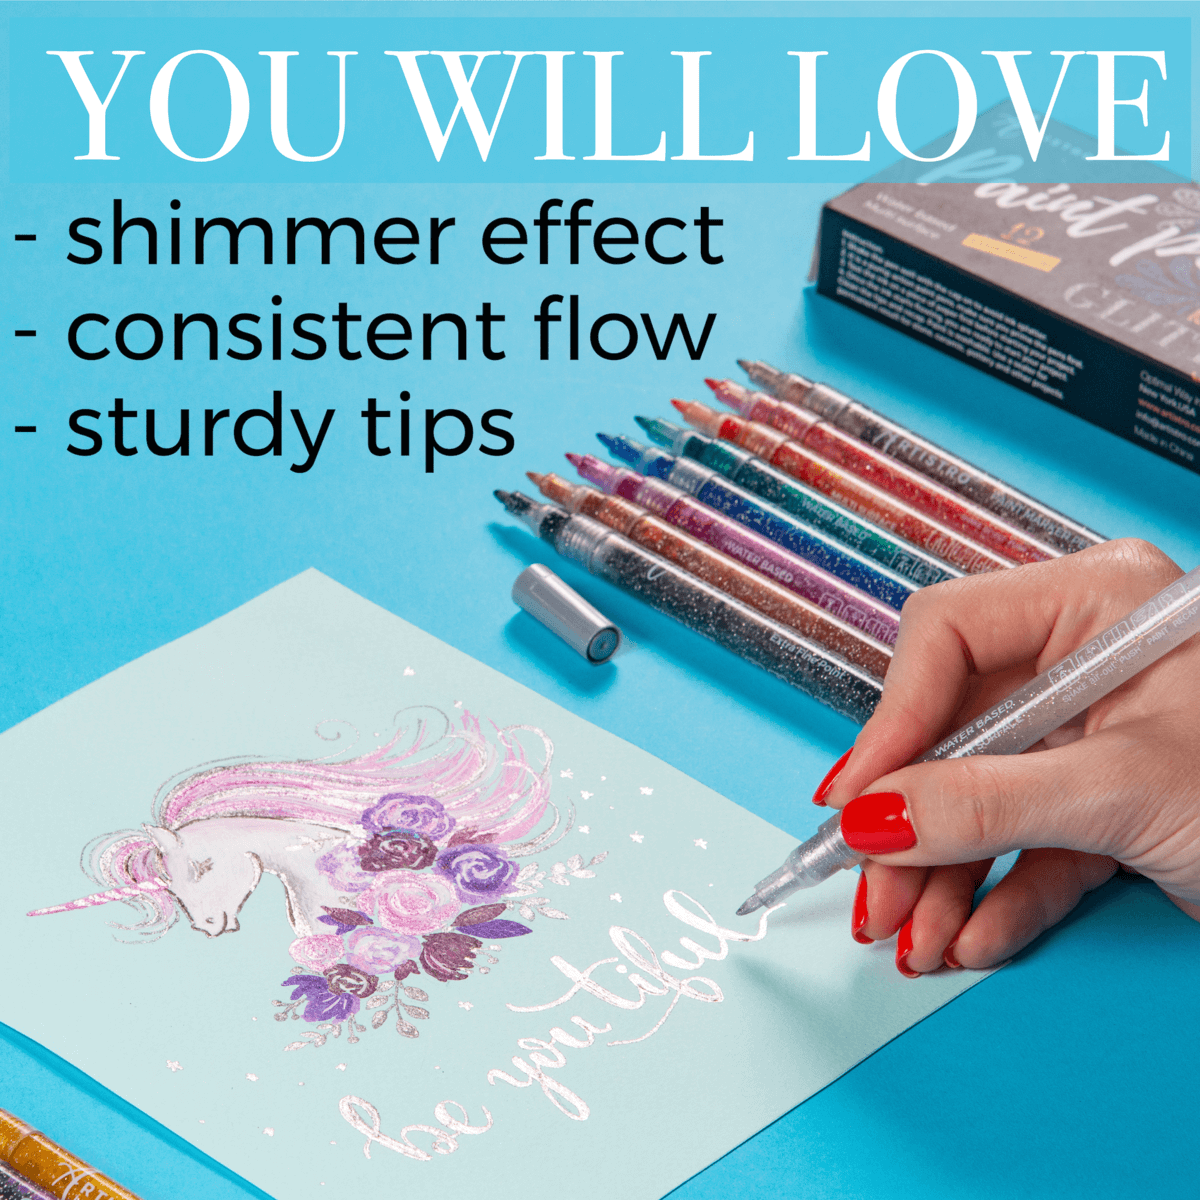 you'll love shimmer effect, consistent flow, sturdy tips